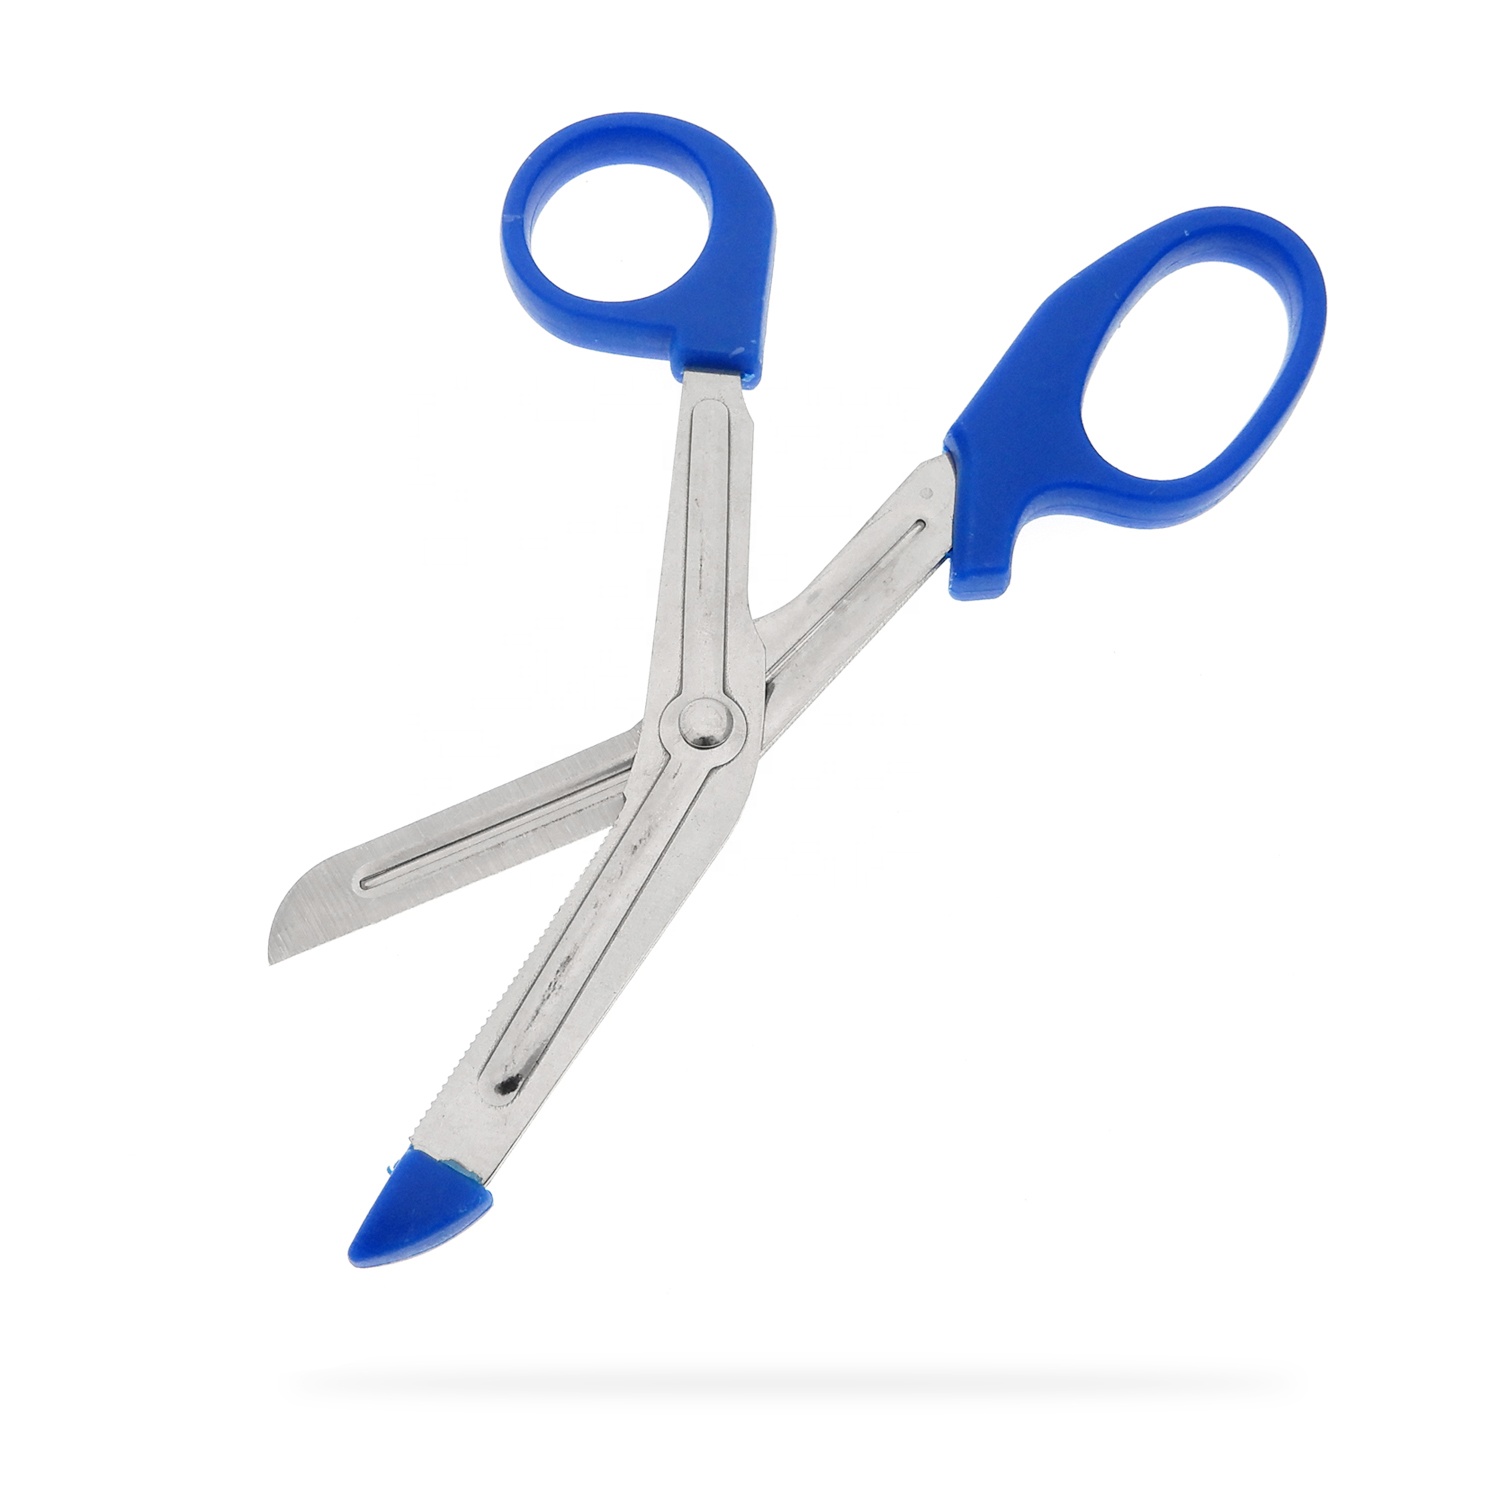 Manufacturers Supply Stainless Steel Elbow With Rubber Head Medical Scissors Canvas Scissors Bandage Scissors First Aid Dressing Scissors